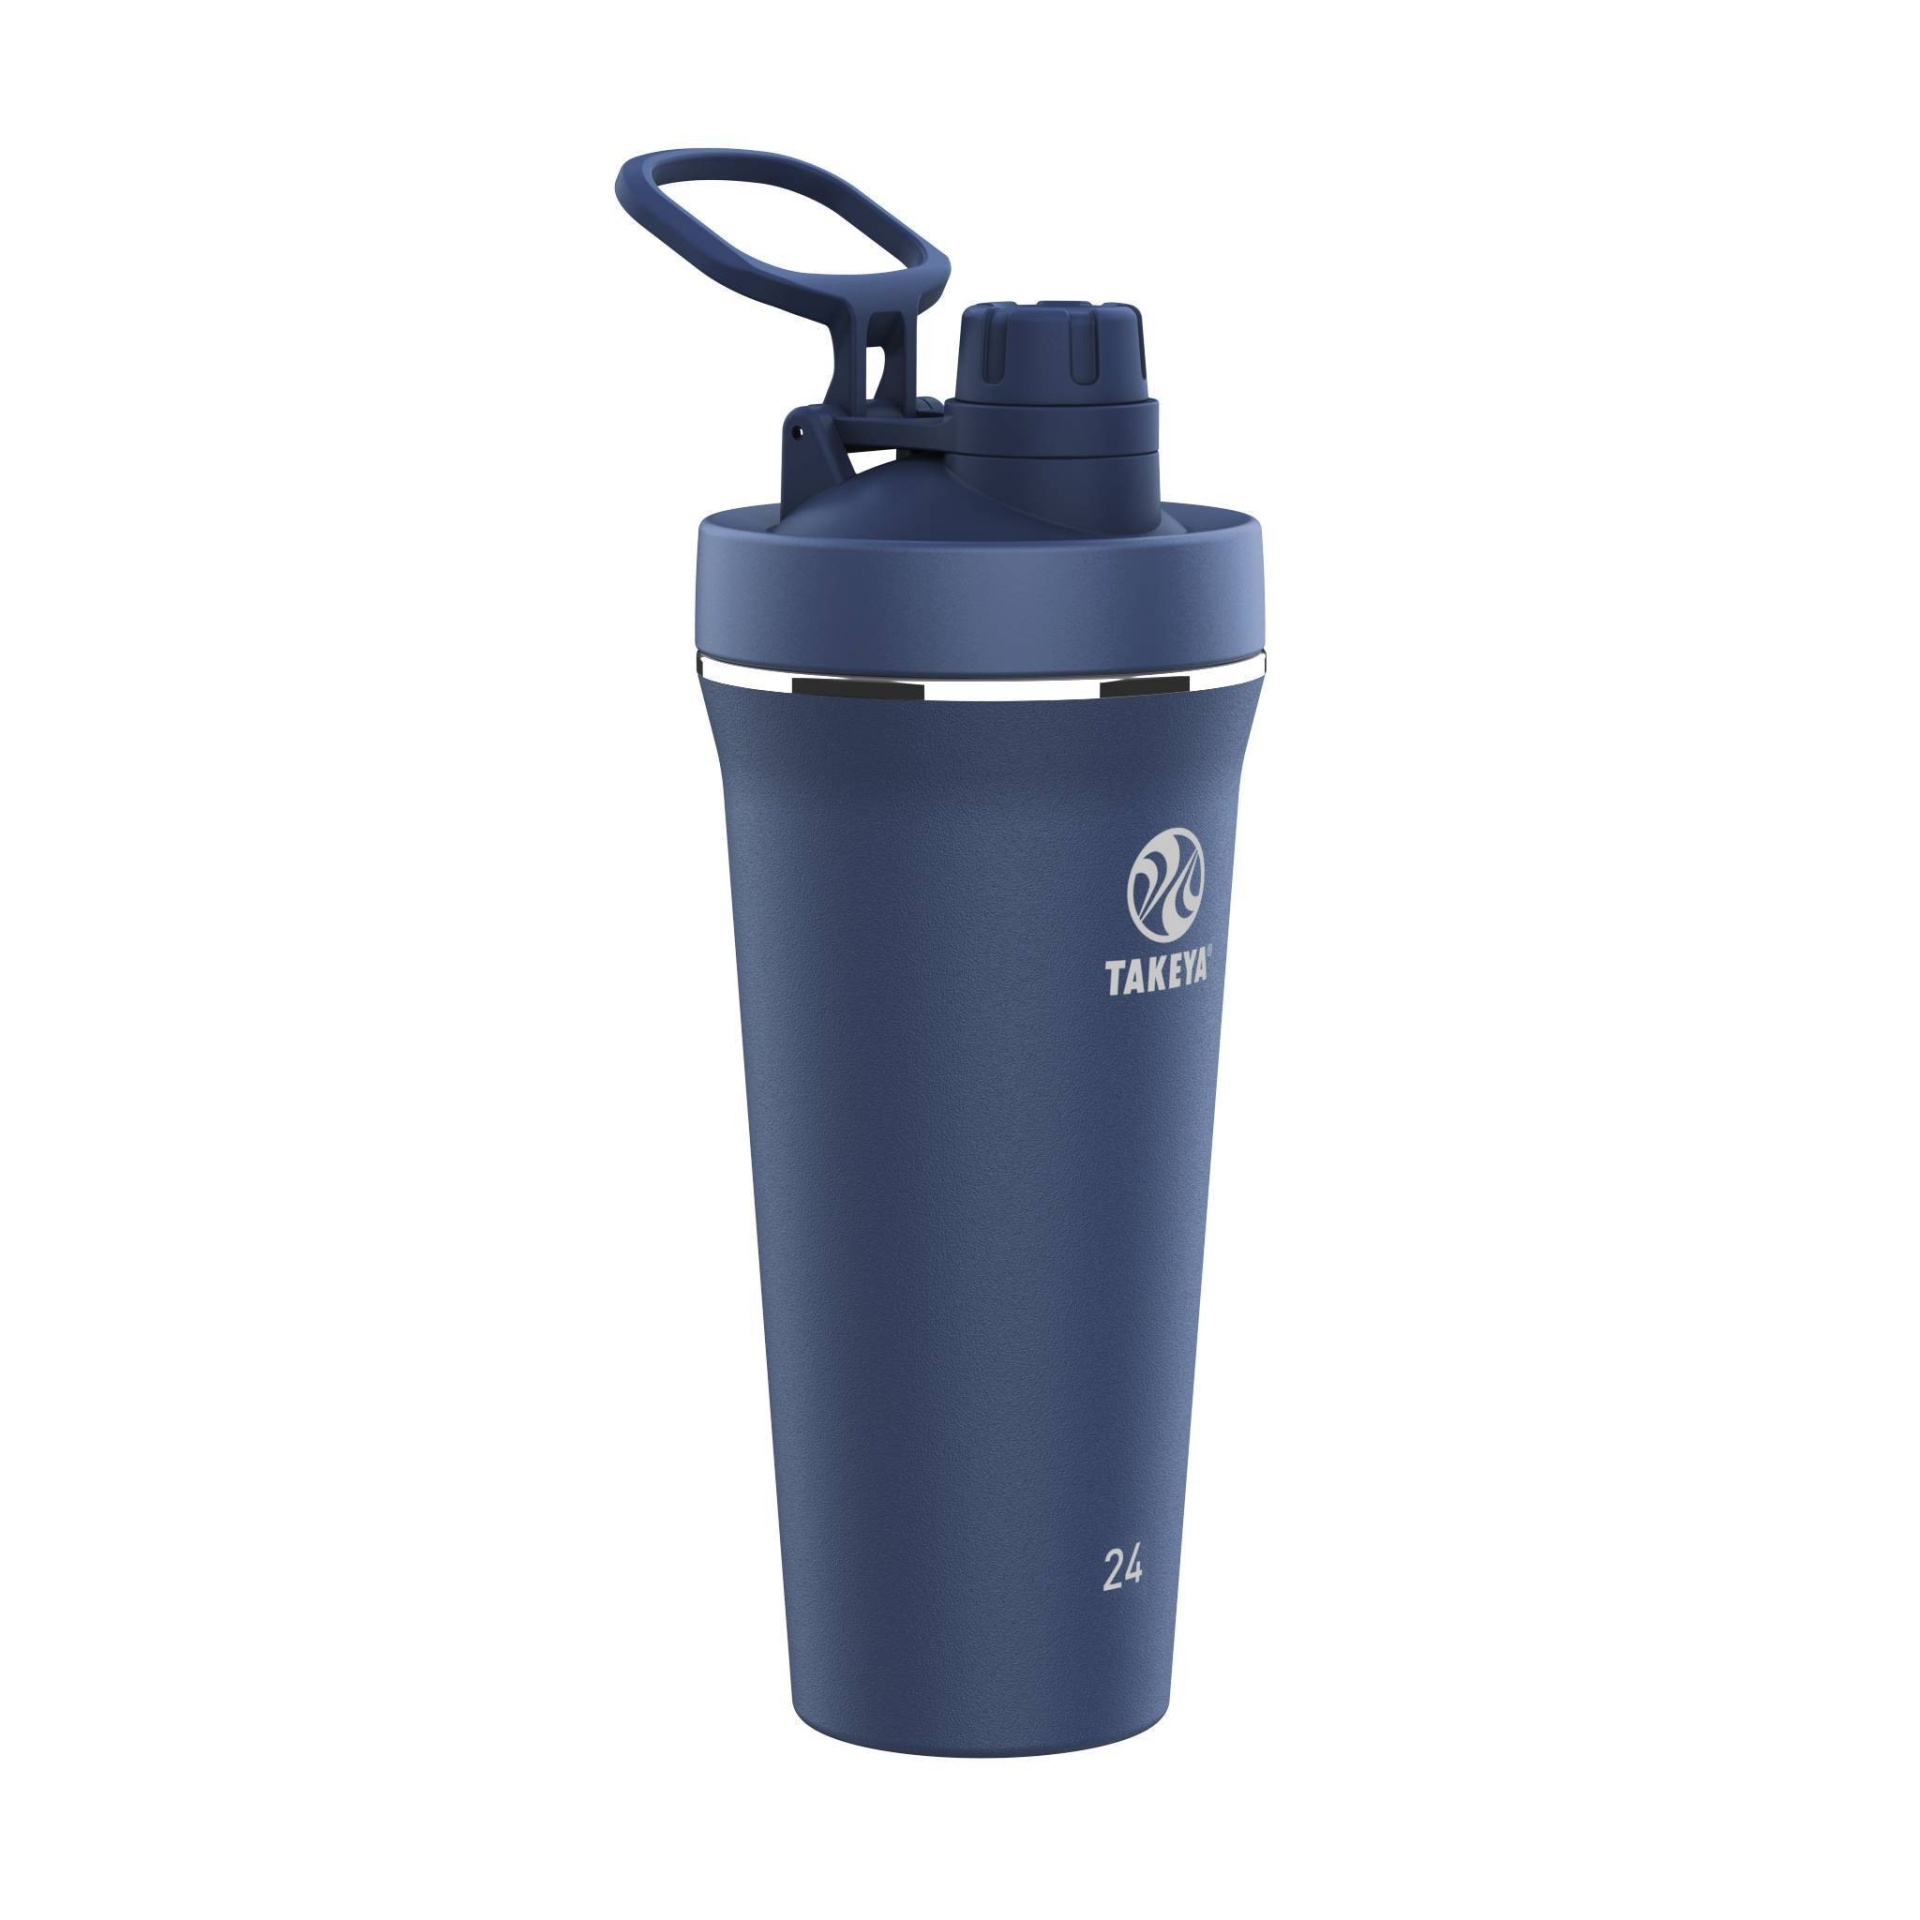 slide 1 of 5, Takeya 24oz Insulated Stainless Steel Protein Shaker Water Bottle with Flip-Lock Spout Lid - Midnight Blue, 1 ct